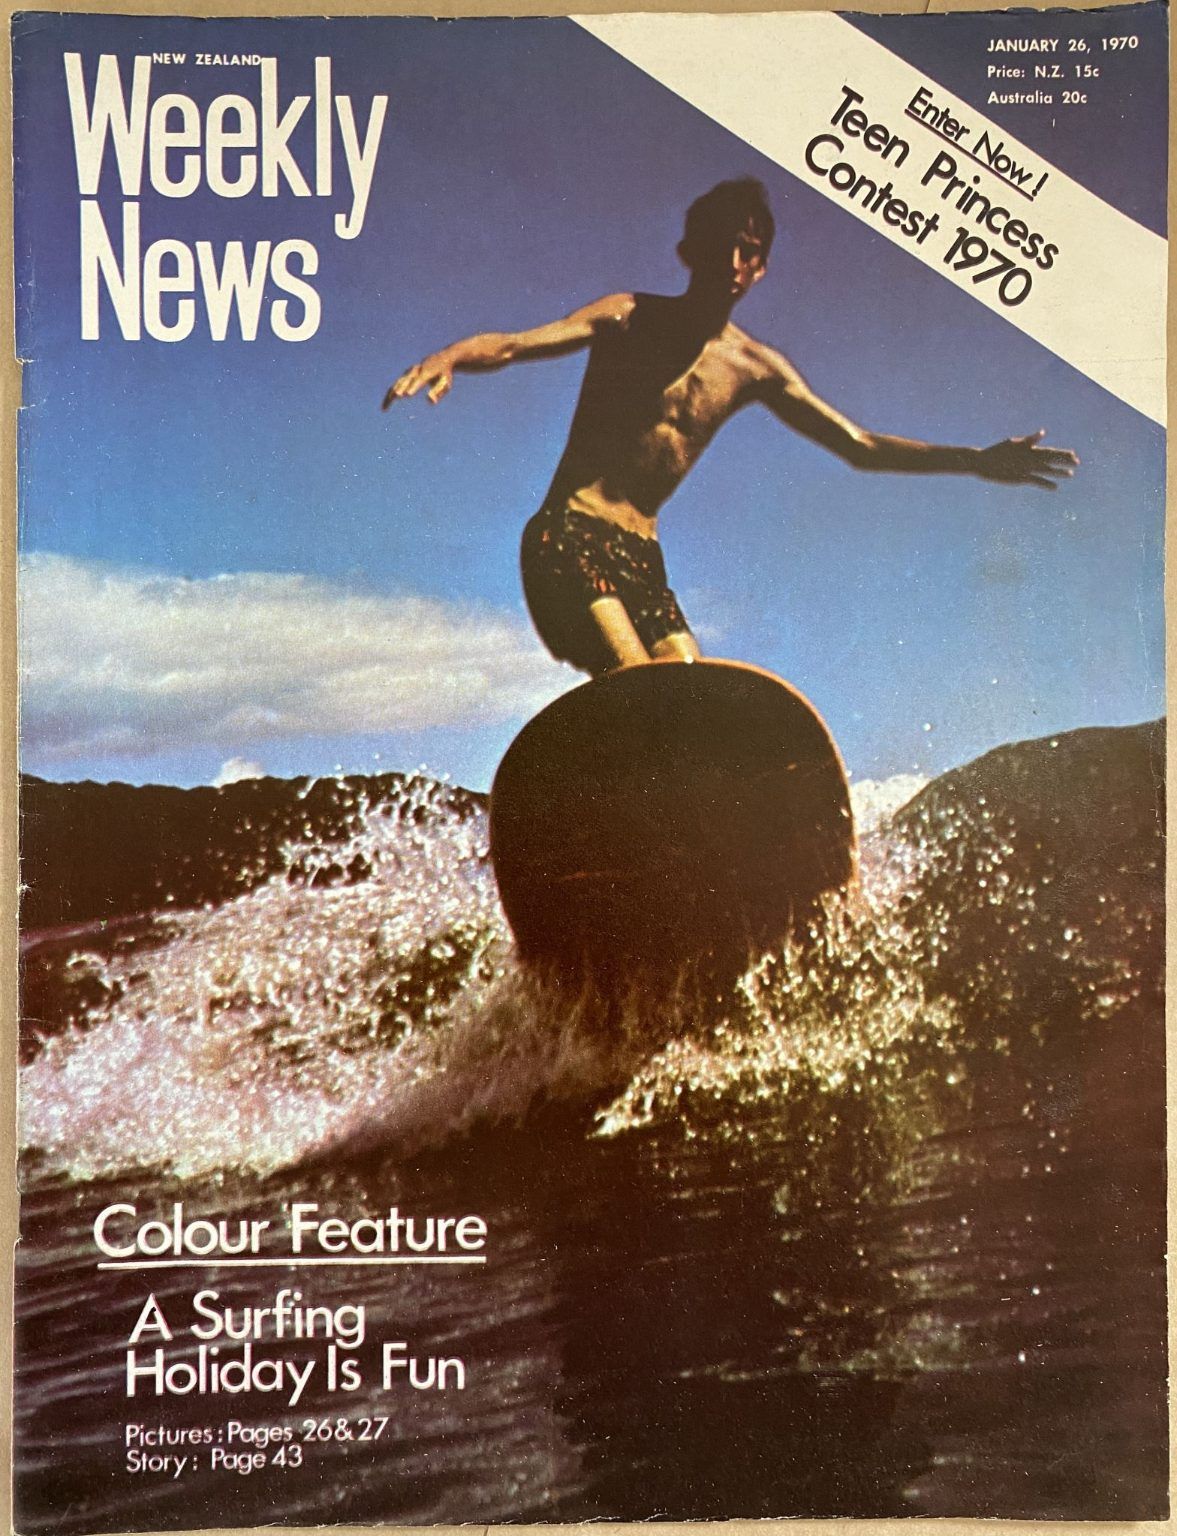 OLD NEWSPAPER: New Zealand Weekly News, No. 5539, 26 January 1970